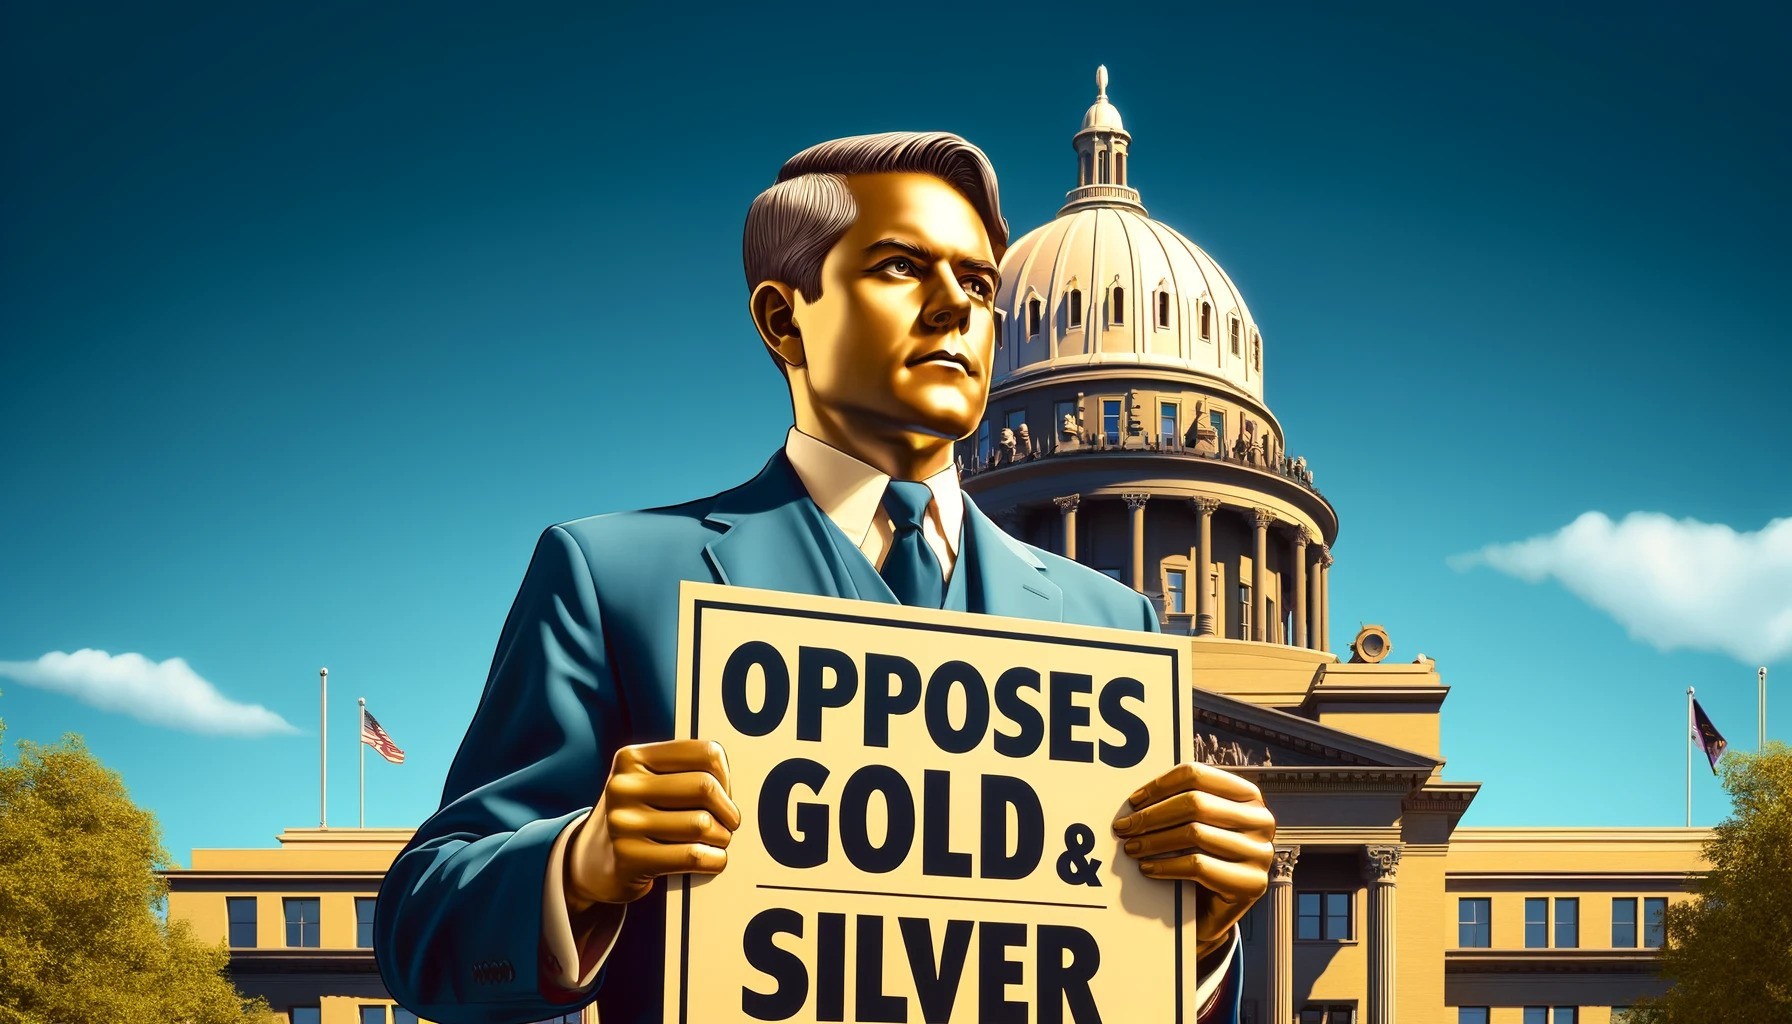 Idaho Governor Brad Little Opposes Gold & Silver, Vetoes Bill to Enable Protective Holdings